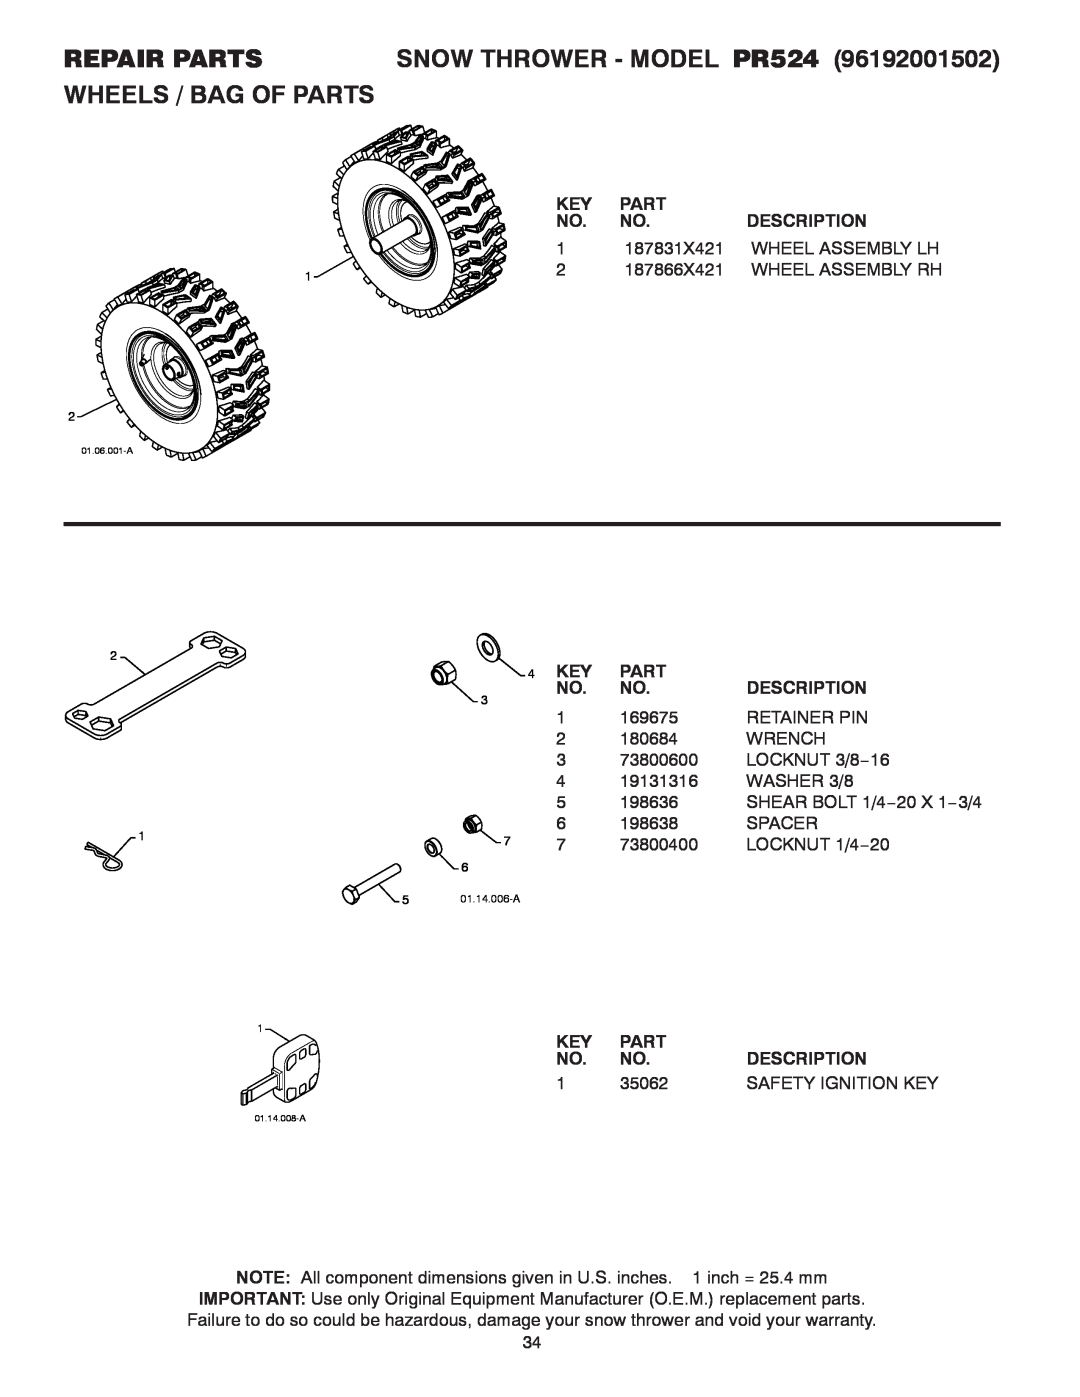 Poulan 421104 owner manual Wheels / Bag Of Parts, Repair Parts, SNOW THROWER - MODEL PR524, Wheel Assembly Rh, 01.14.006-A 